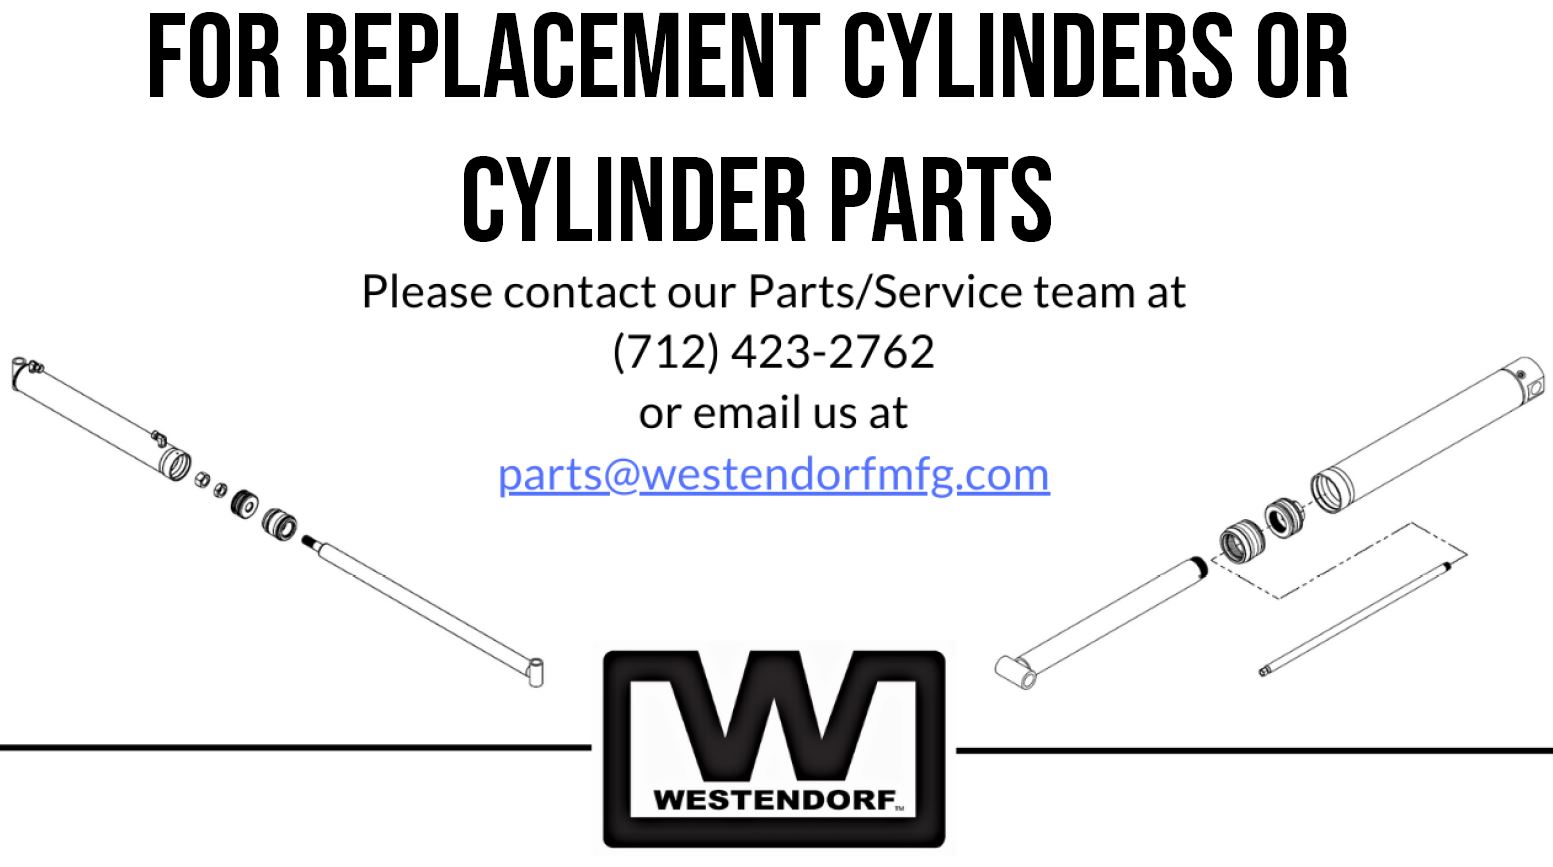 Call for Replacement Cylinders